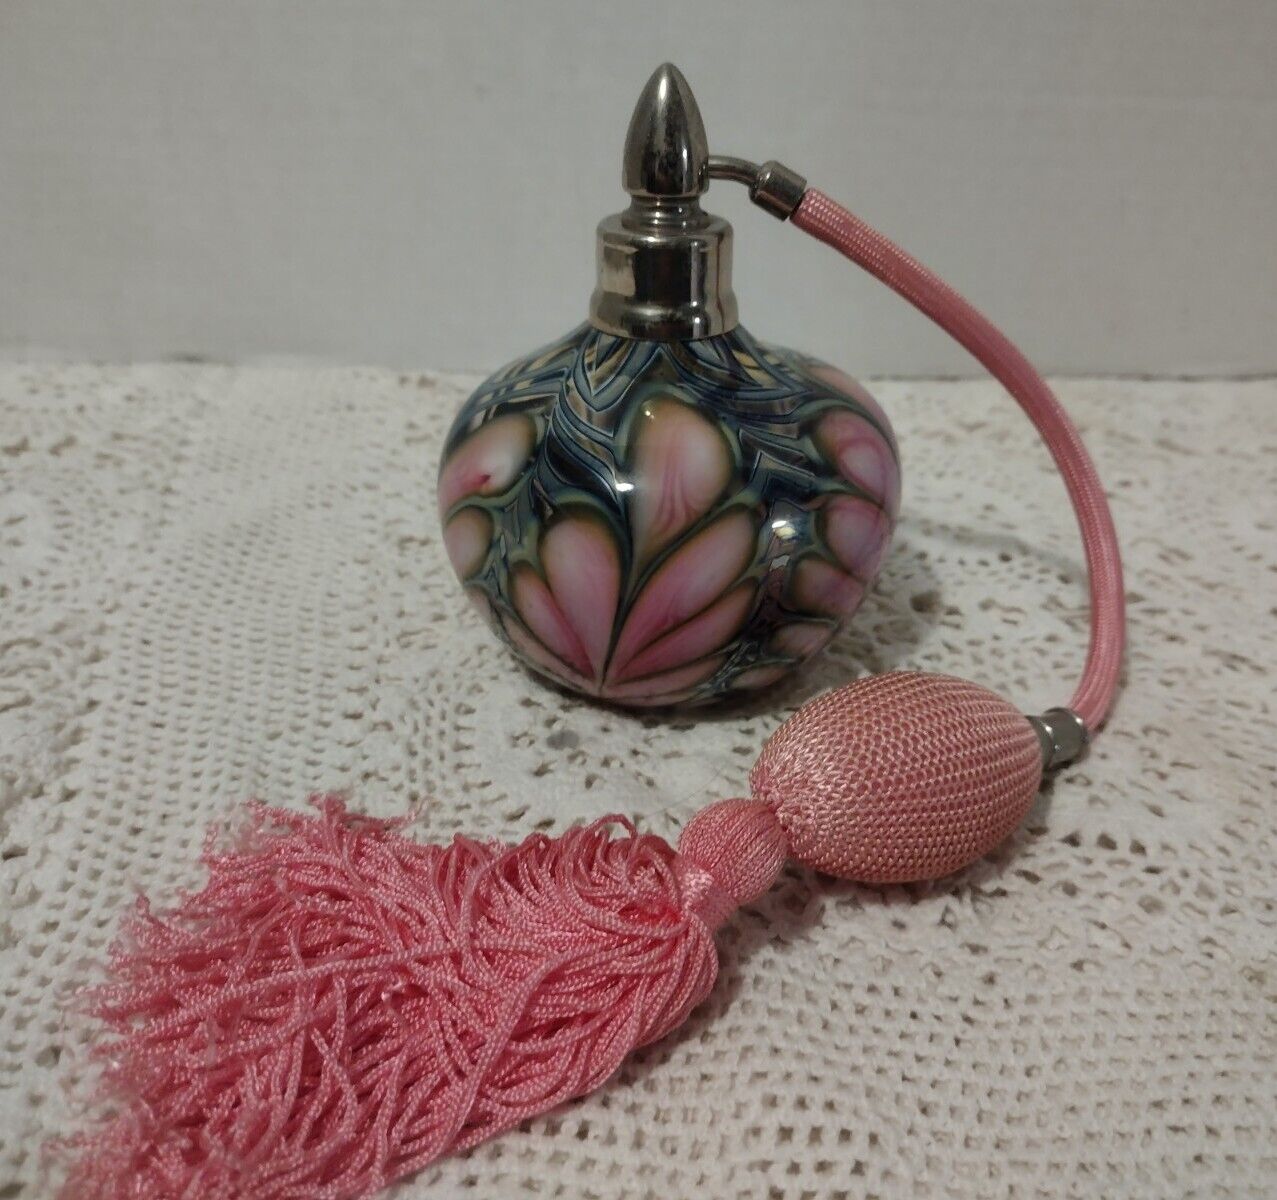 RARE DANIEL LOTTON PINK PULLED FEATHER PERFUME ATOMIZER SIGNED DATED 1987 